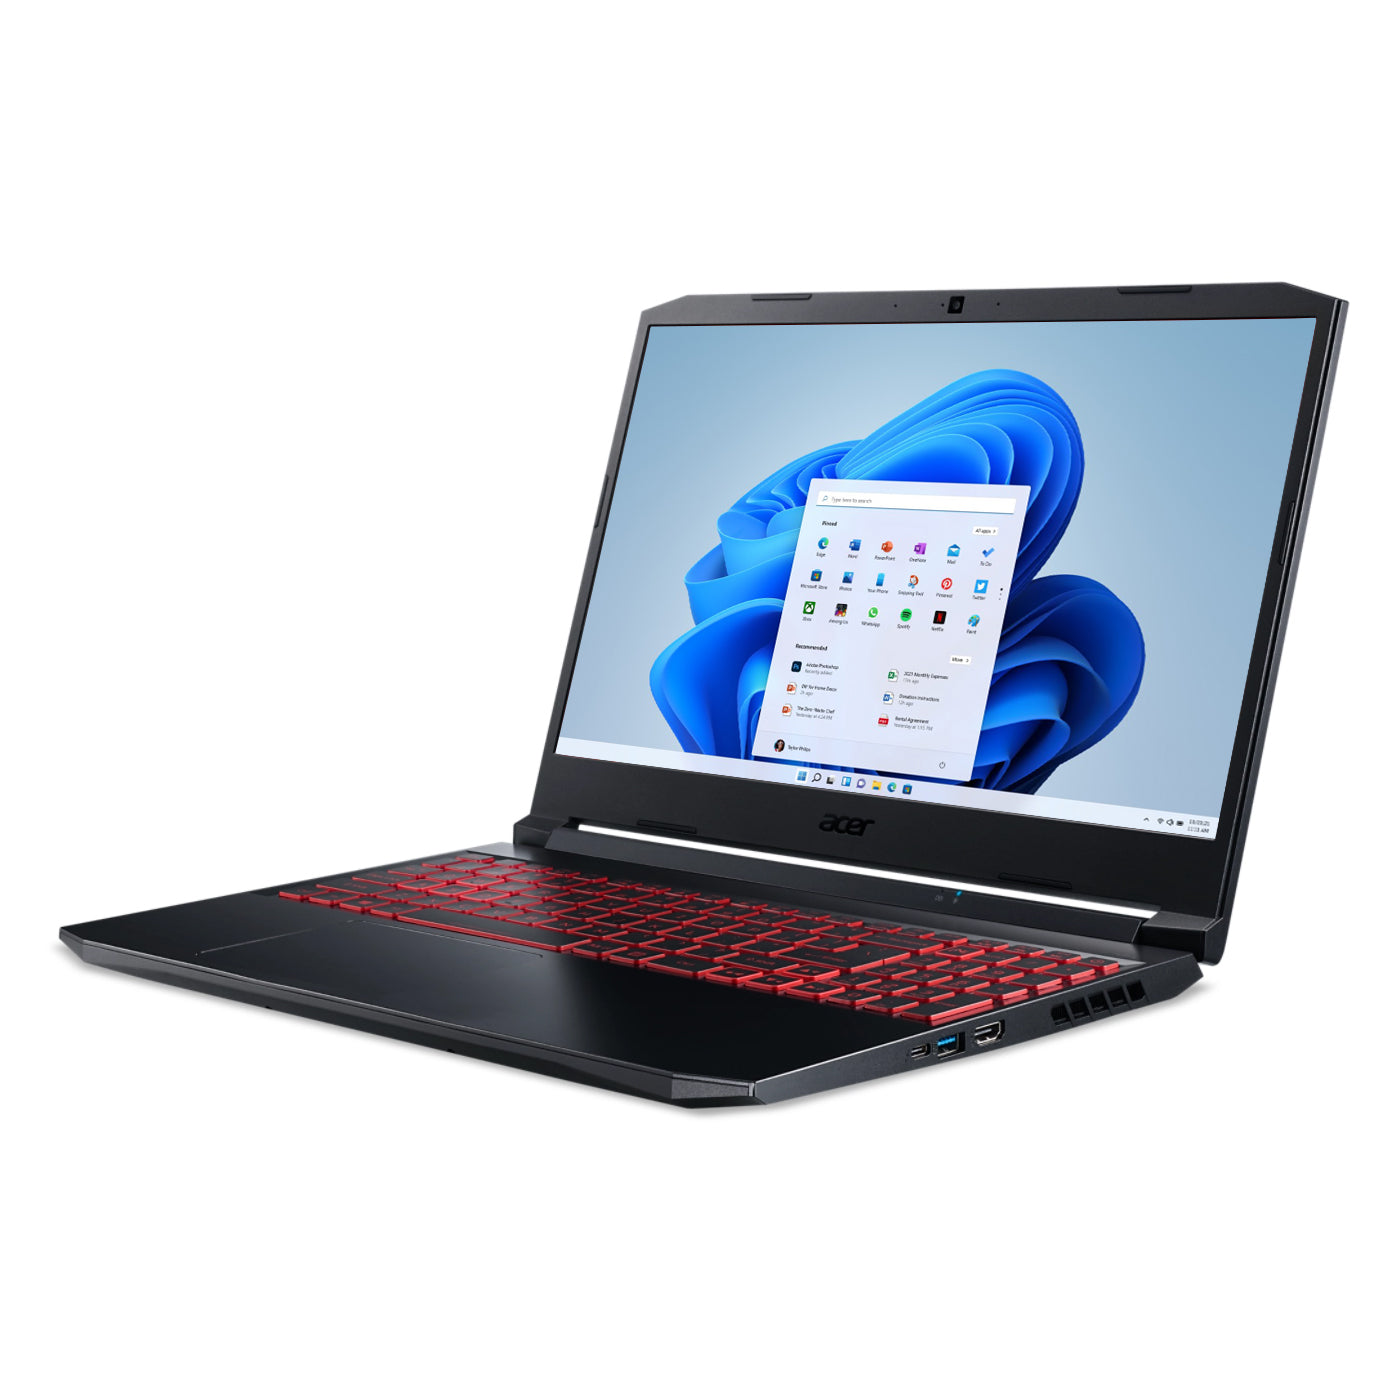 Acer Nitro 5 AN515-57-77N5 Core i7-11800h Rtx 3050 144HZ Gaming Laptop Offers (Brand New) Gaming laptop, Graphic Design laptop, best laptop for gaming, Best laptop for graphic design, computer for sale Lebanon, laptop for video editing in Lebanon, laptop for sale Lebanon, Best graphic design laptop,	Best video editing laptop, Best programming laptop, laptop for sale in Lebanon, laptops for sale in Lebanon, laptop for sale in Lebanon, buy computer Lebanon, buy laptop Lebanon.